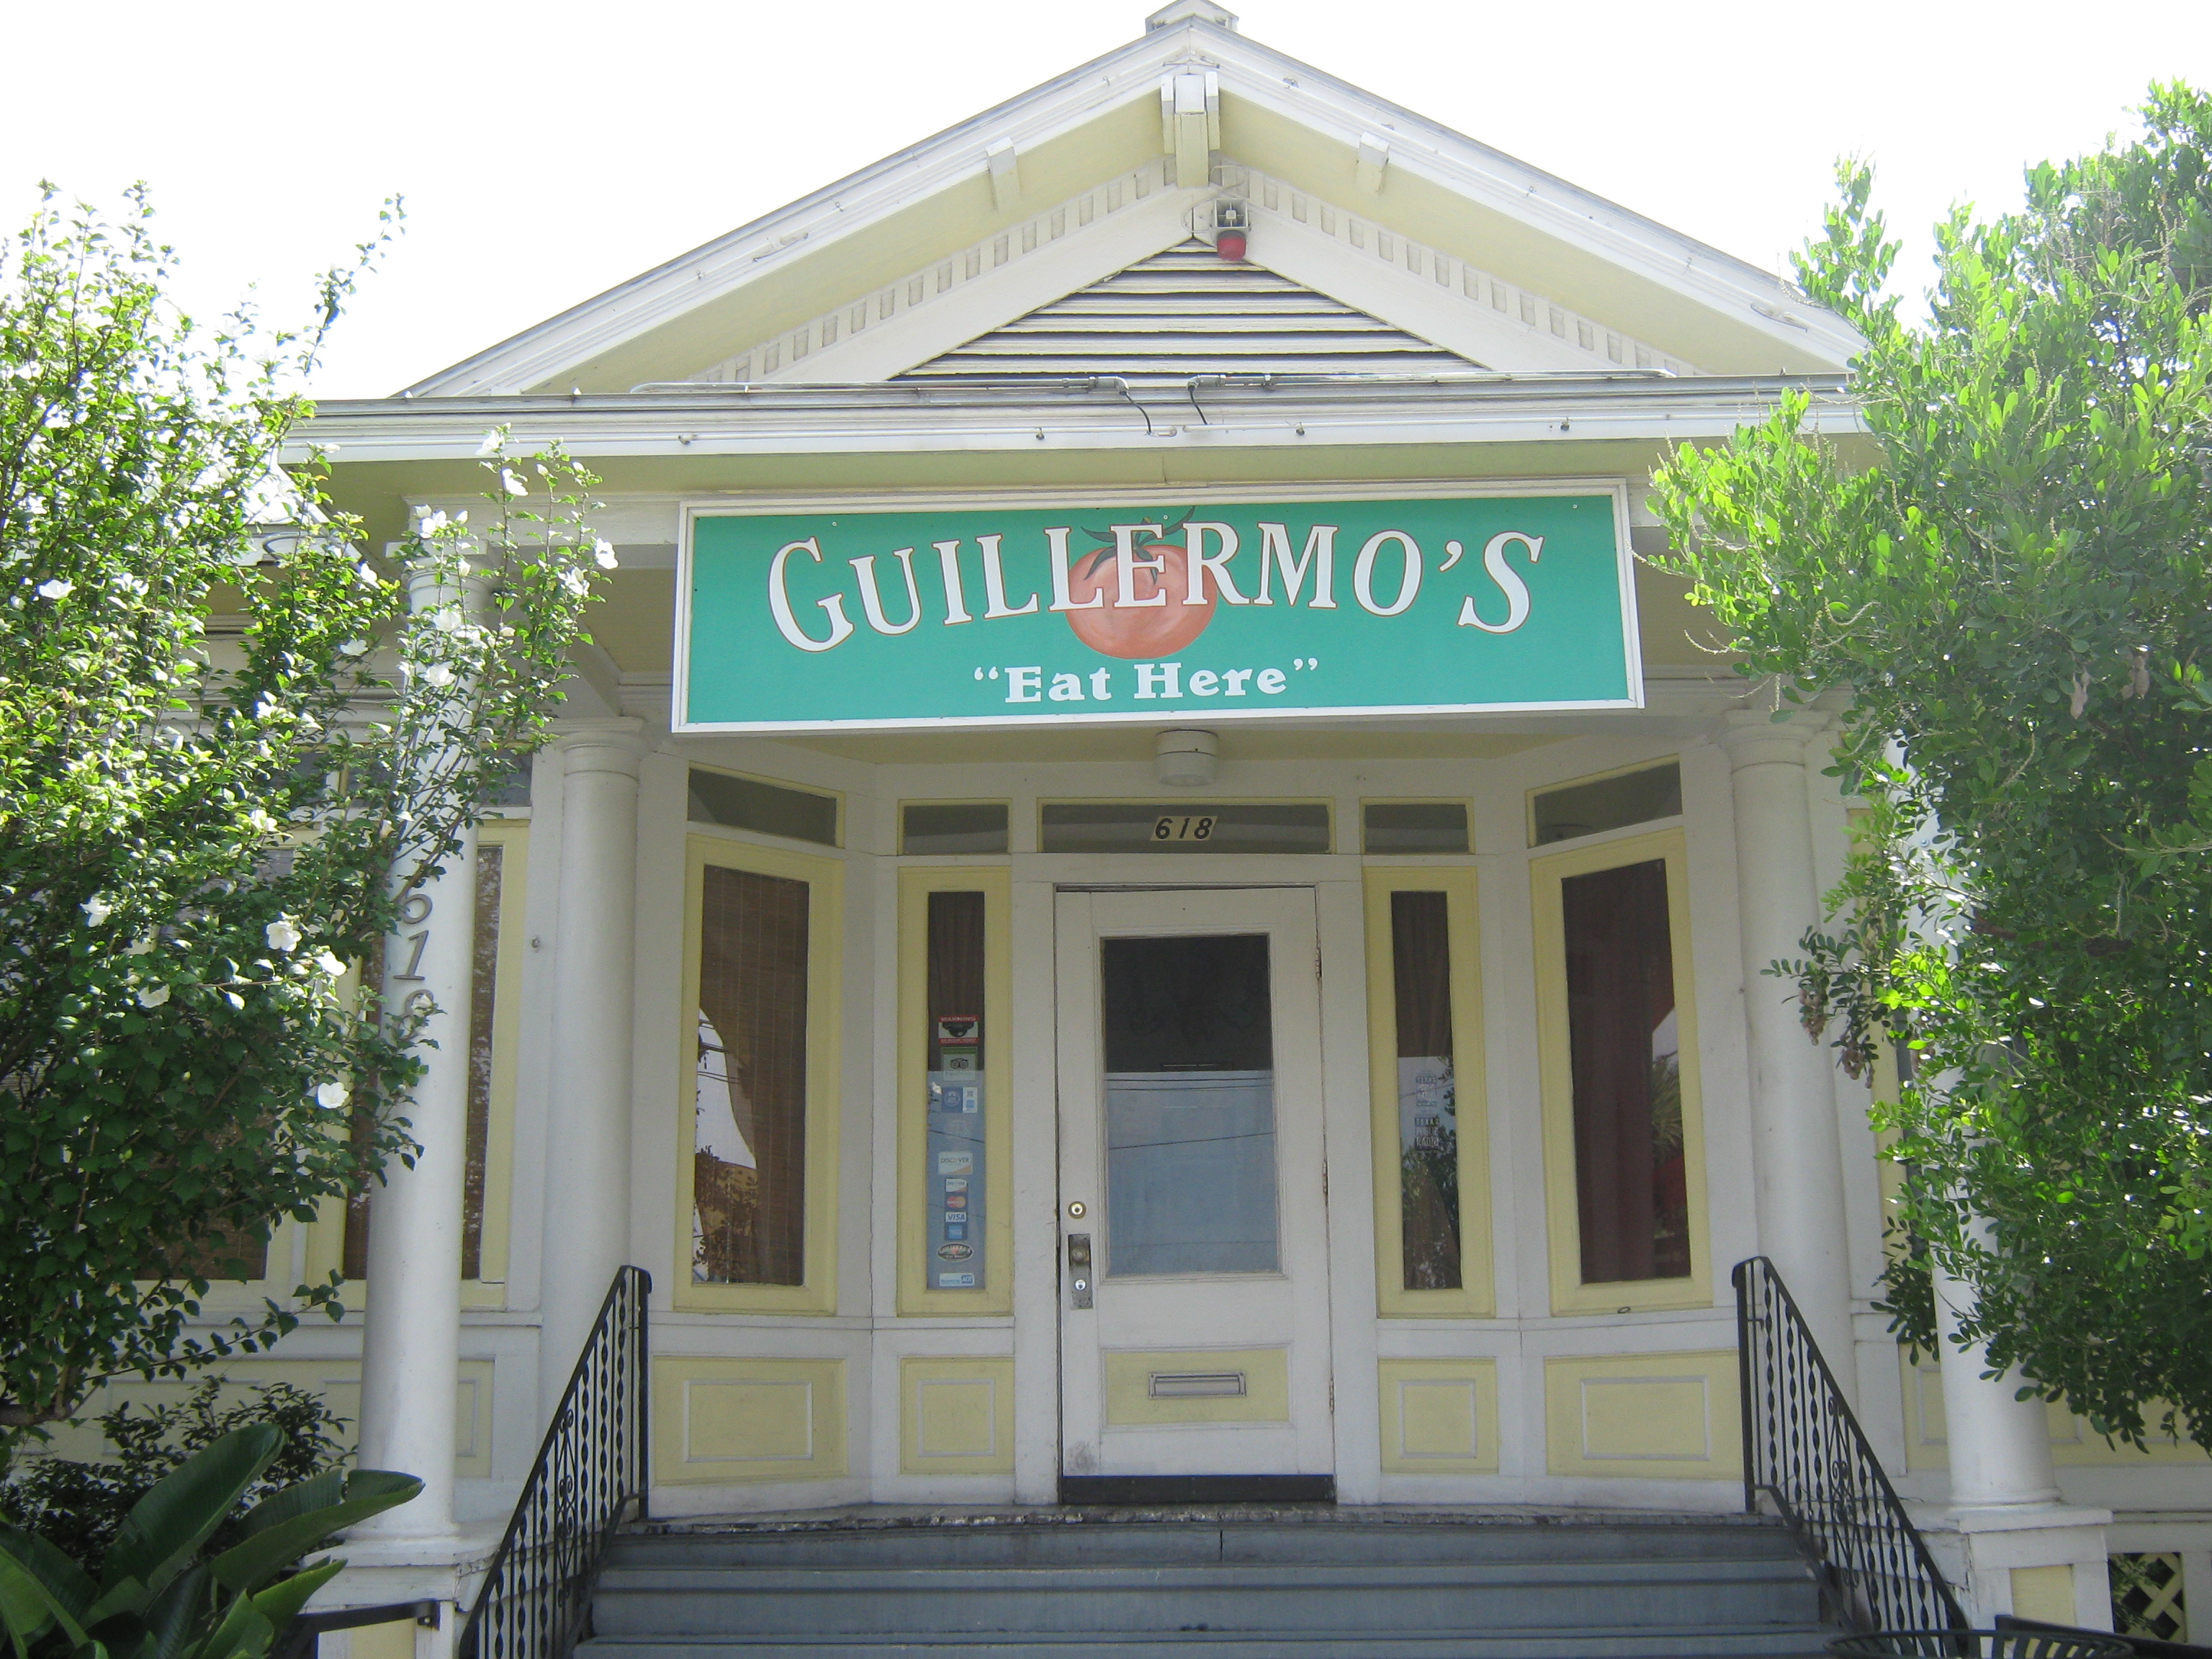 Photo of Guillermo's restaurant on McCullough.